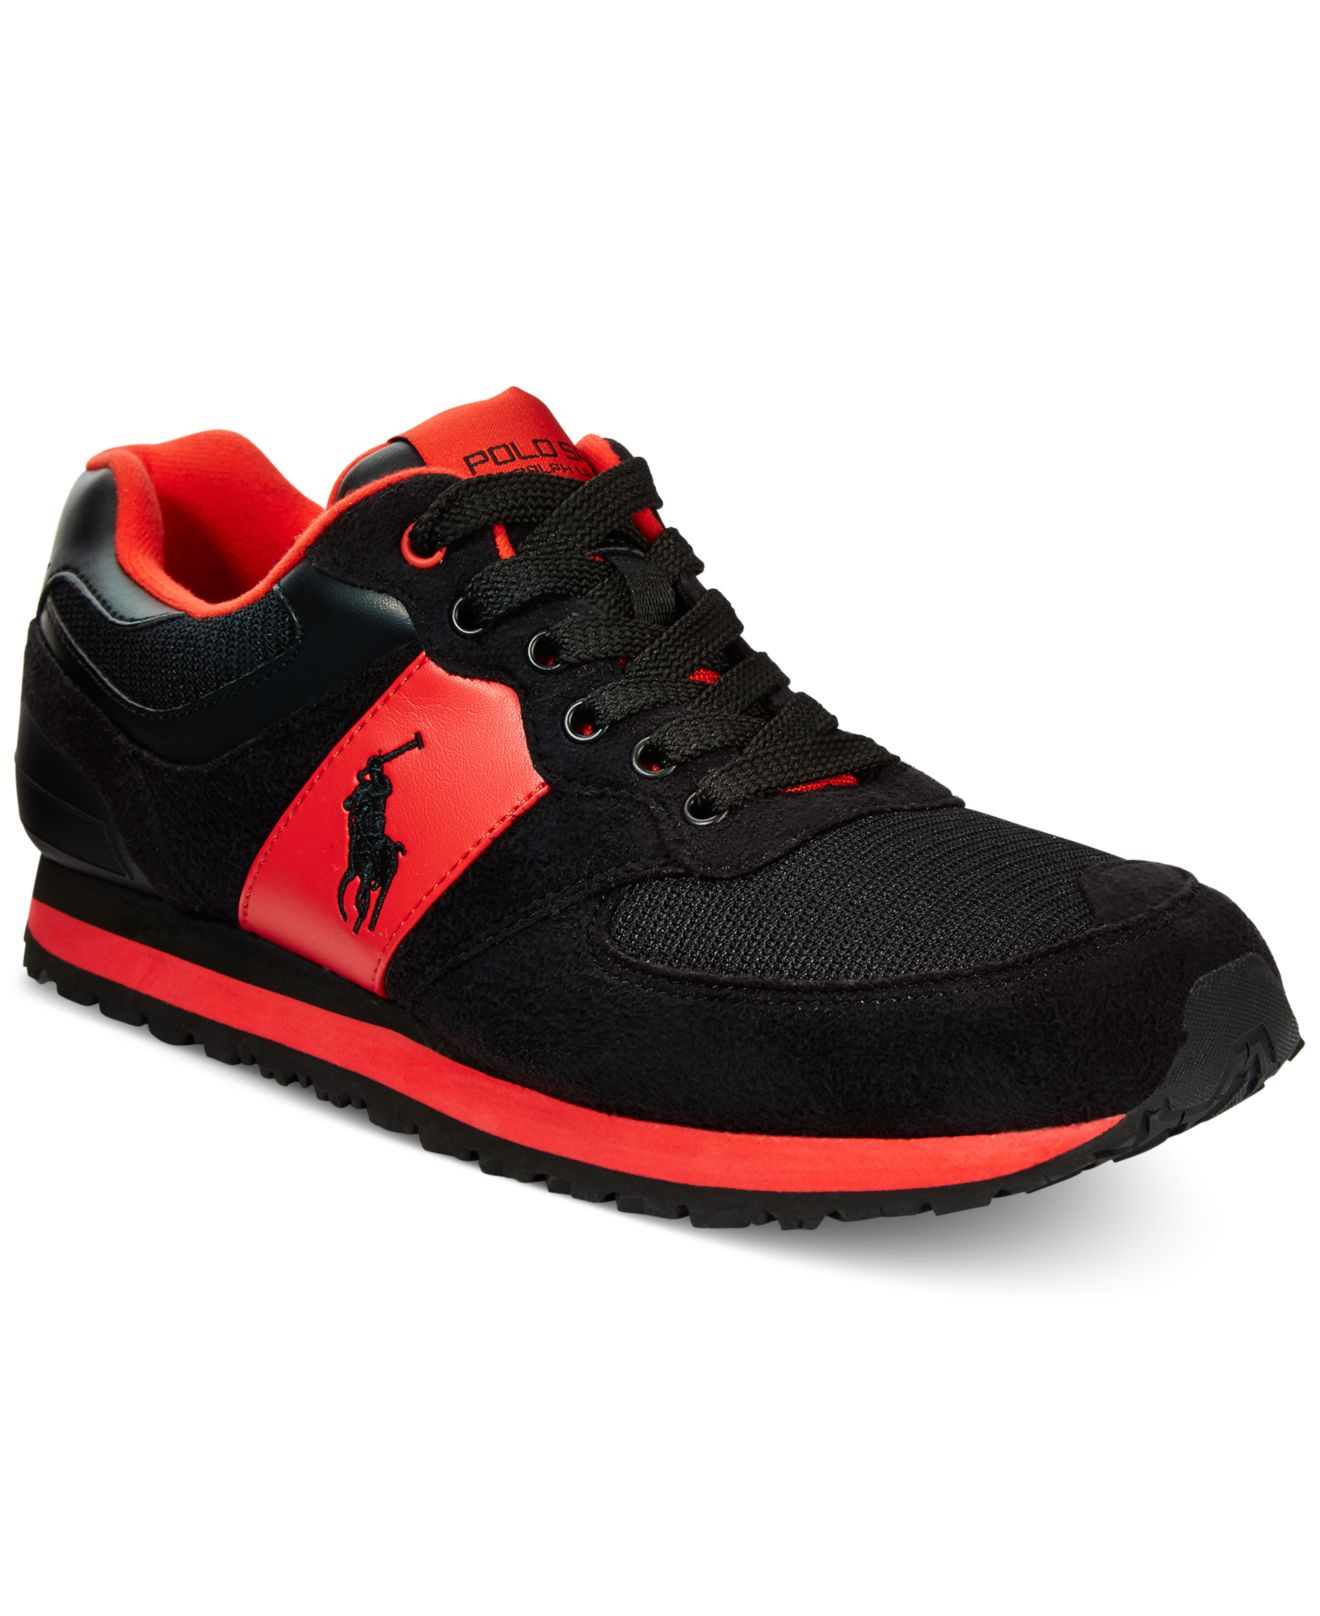 red and black polo shoes - 57% OFF 